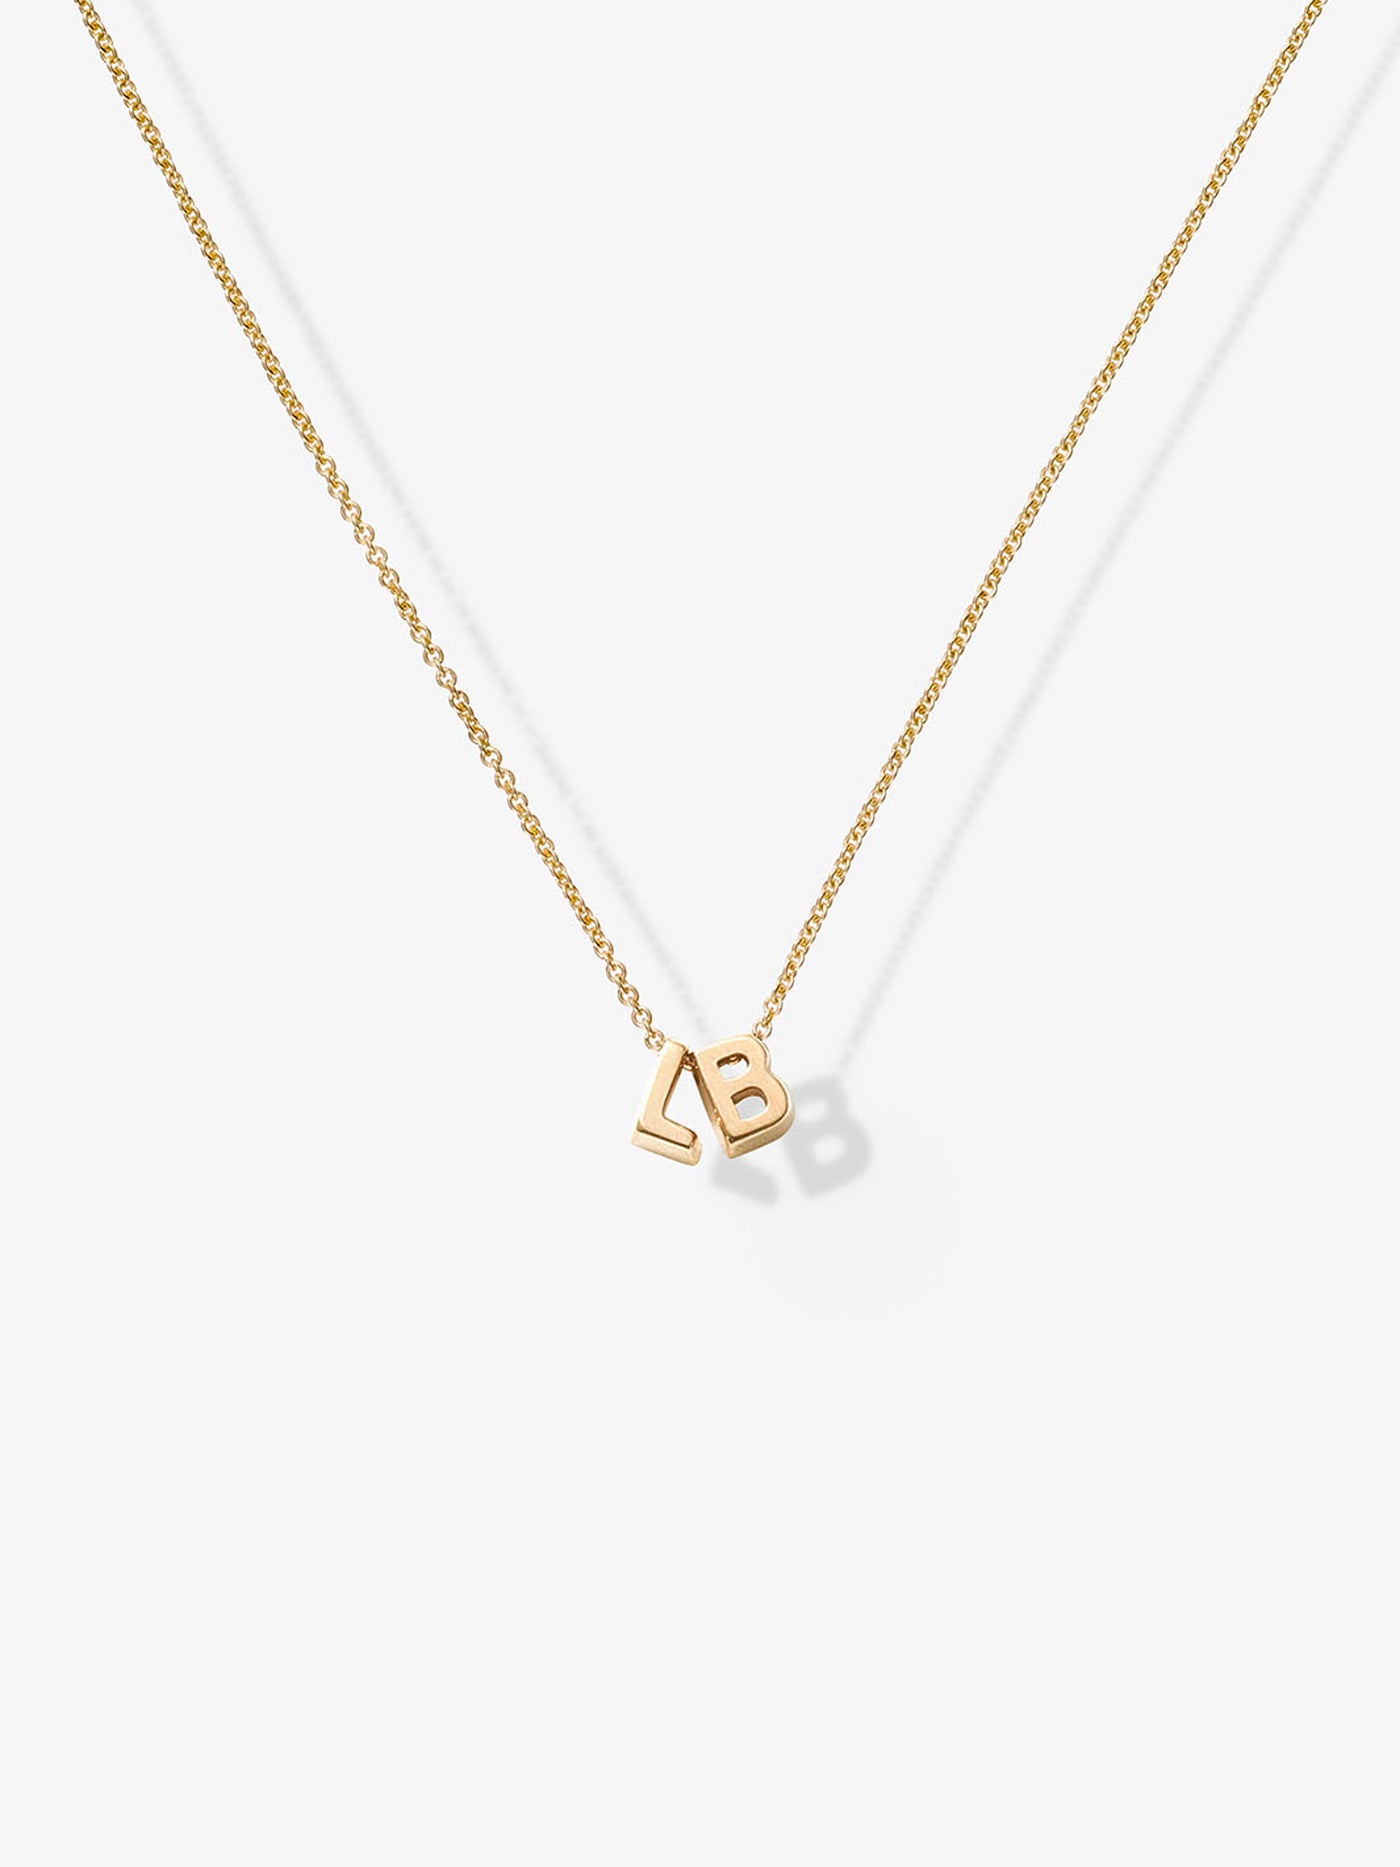 Two Letters Necklace in 18k Gold